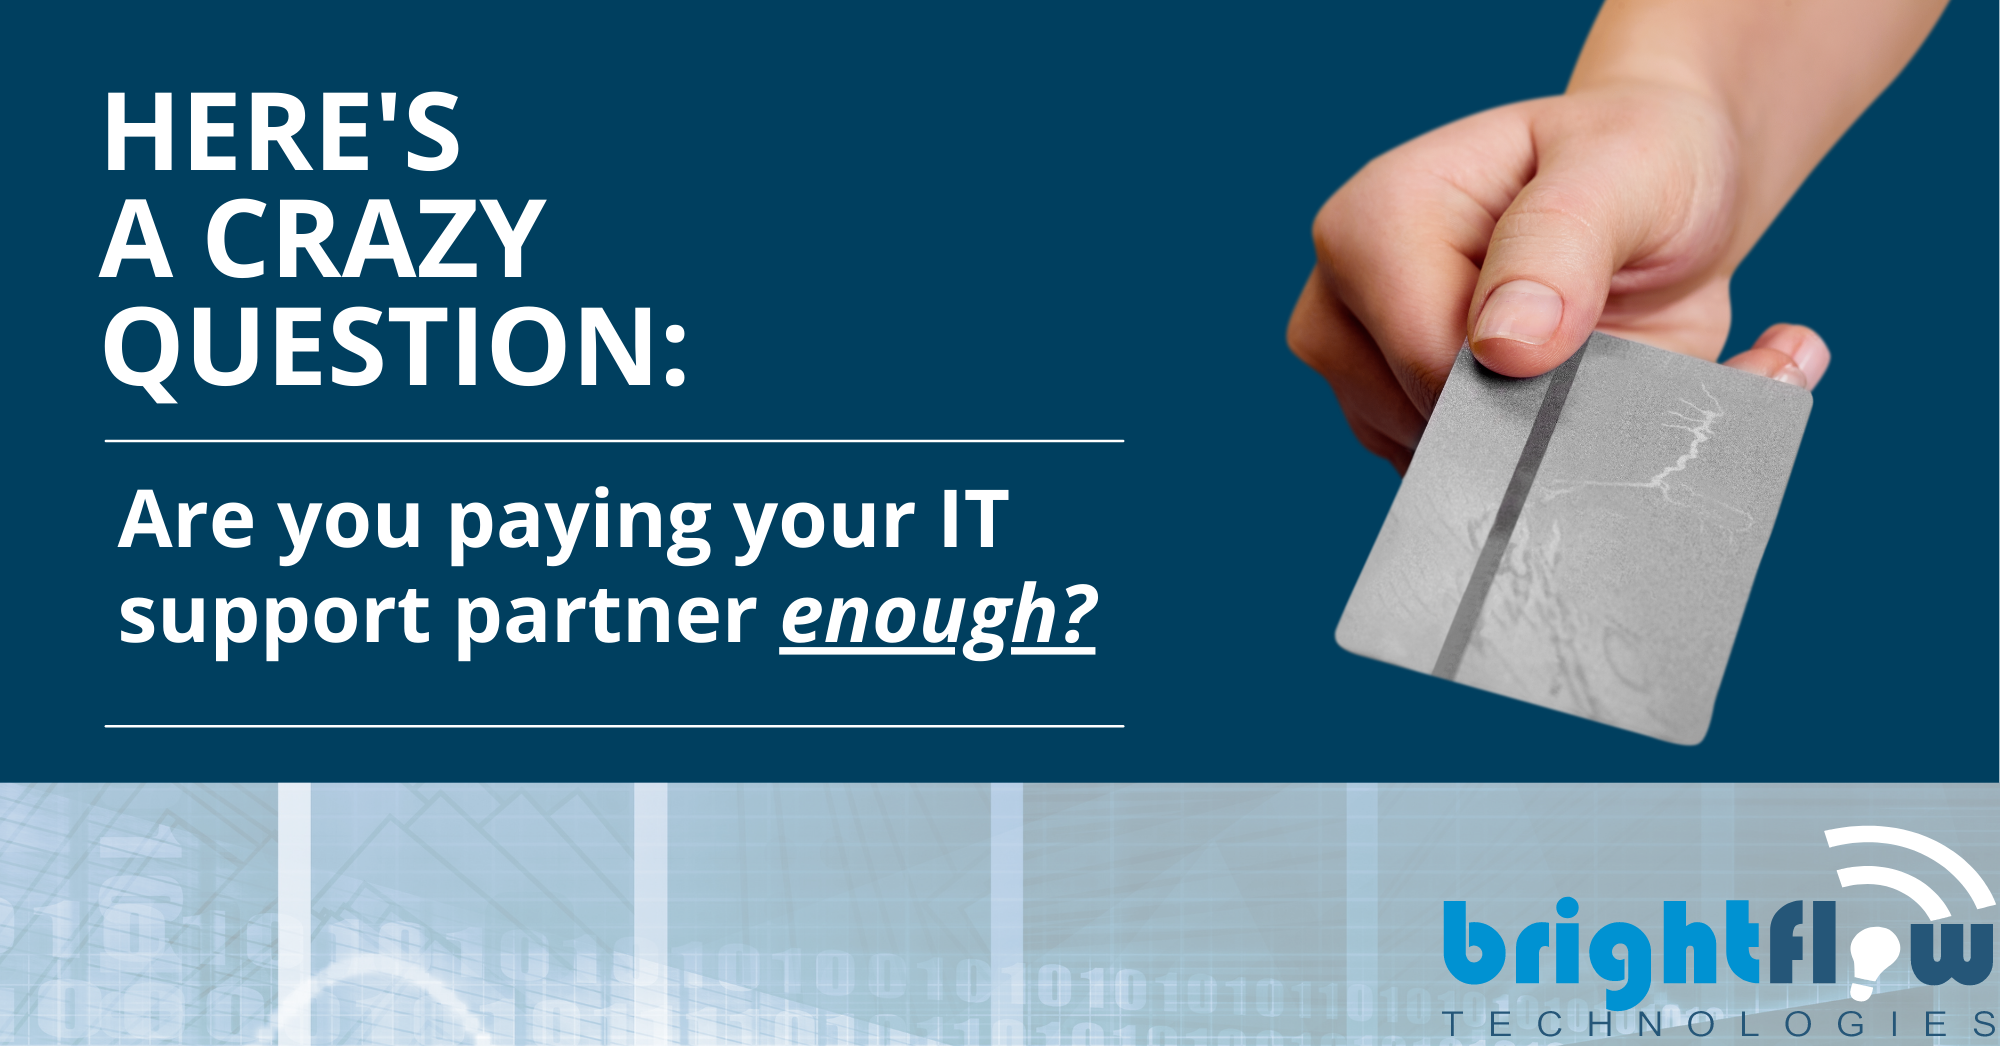 Are you paying your IT support partner enough?